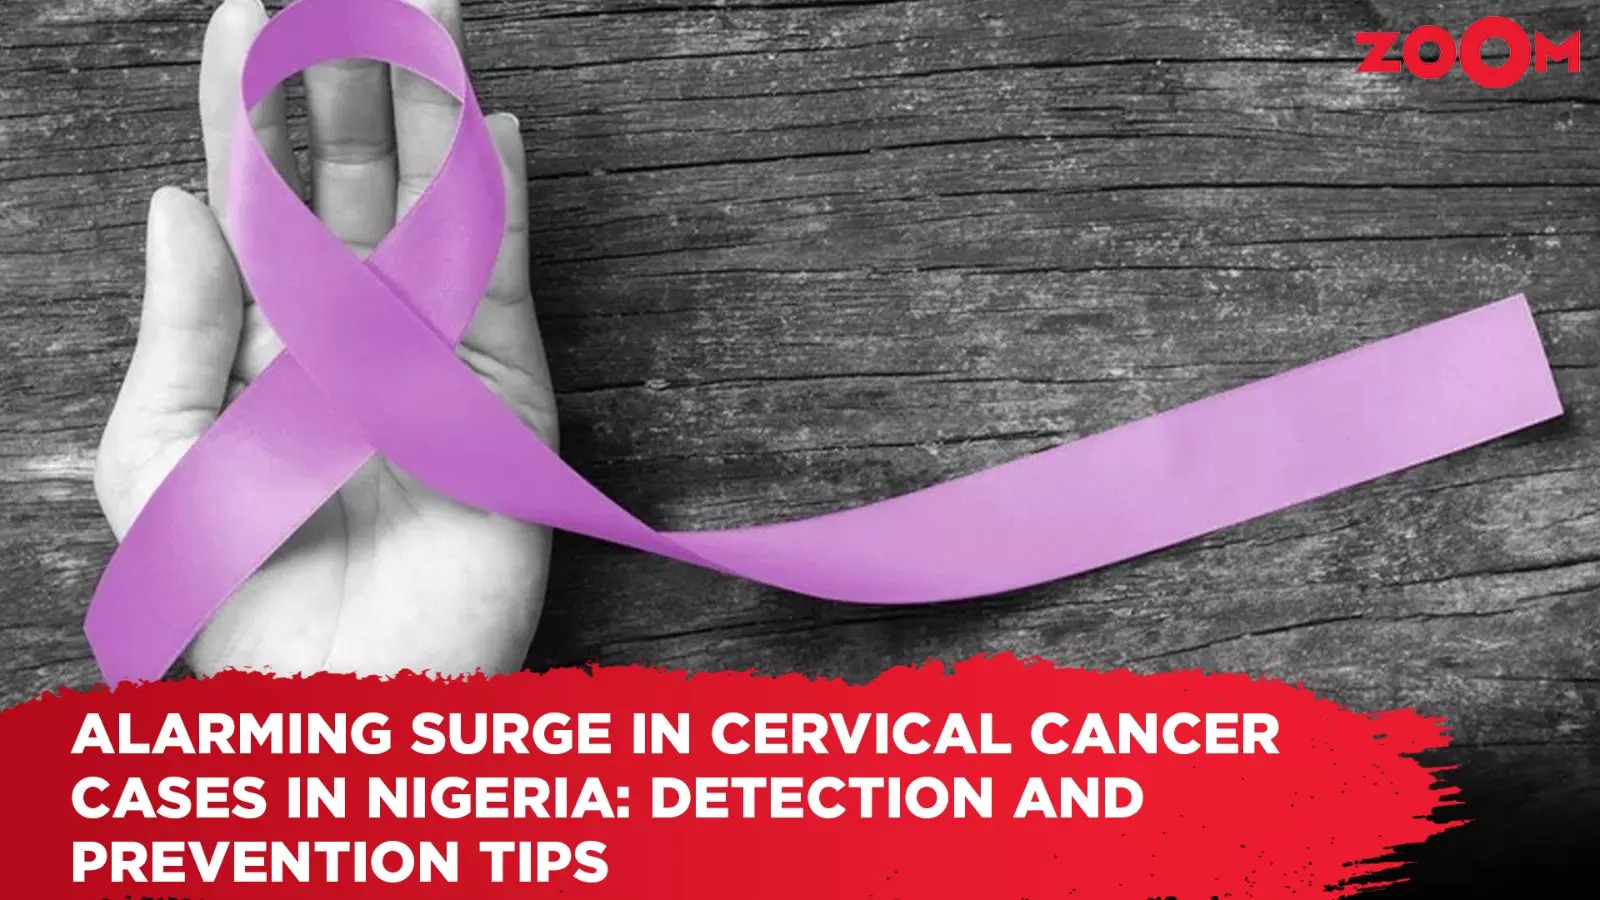 Alarming surge in cervical cancer cases in Nigeria Detection and prevention tips